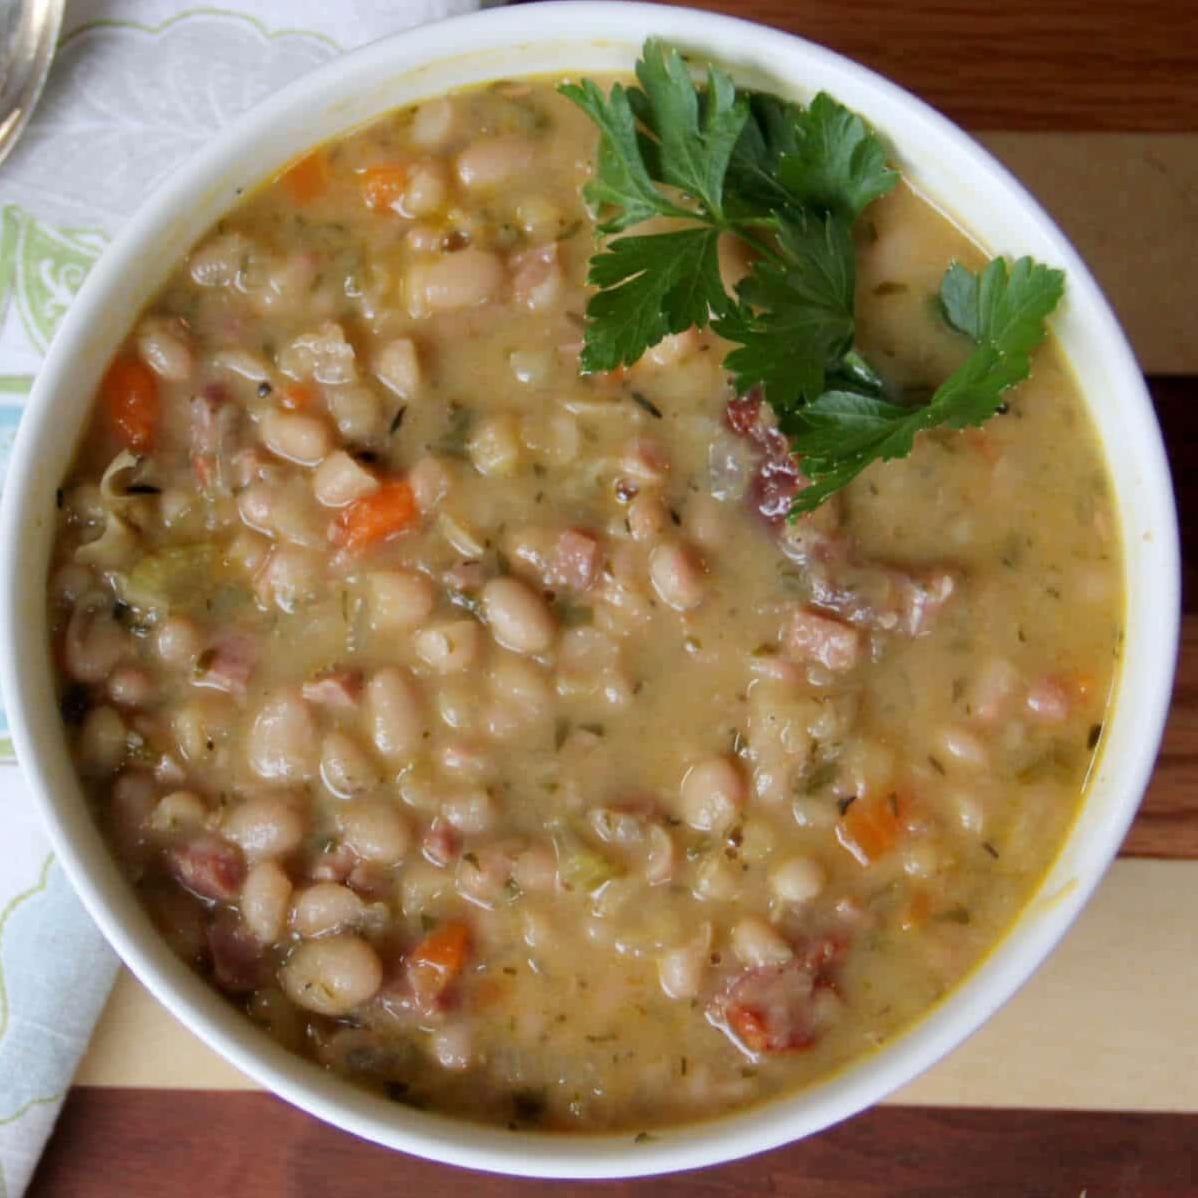  This soup is perfect for a family dinner or a cozy night in.